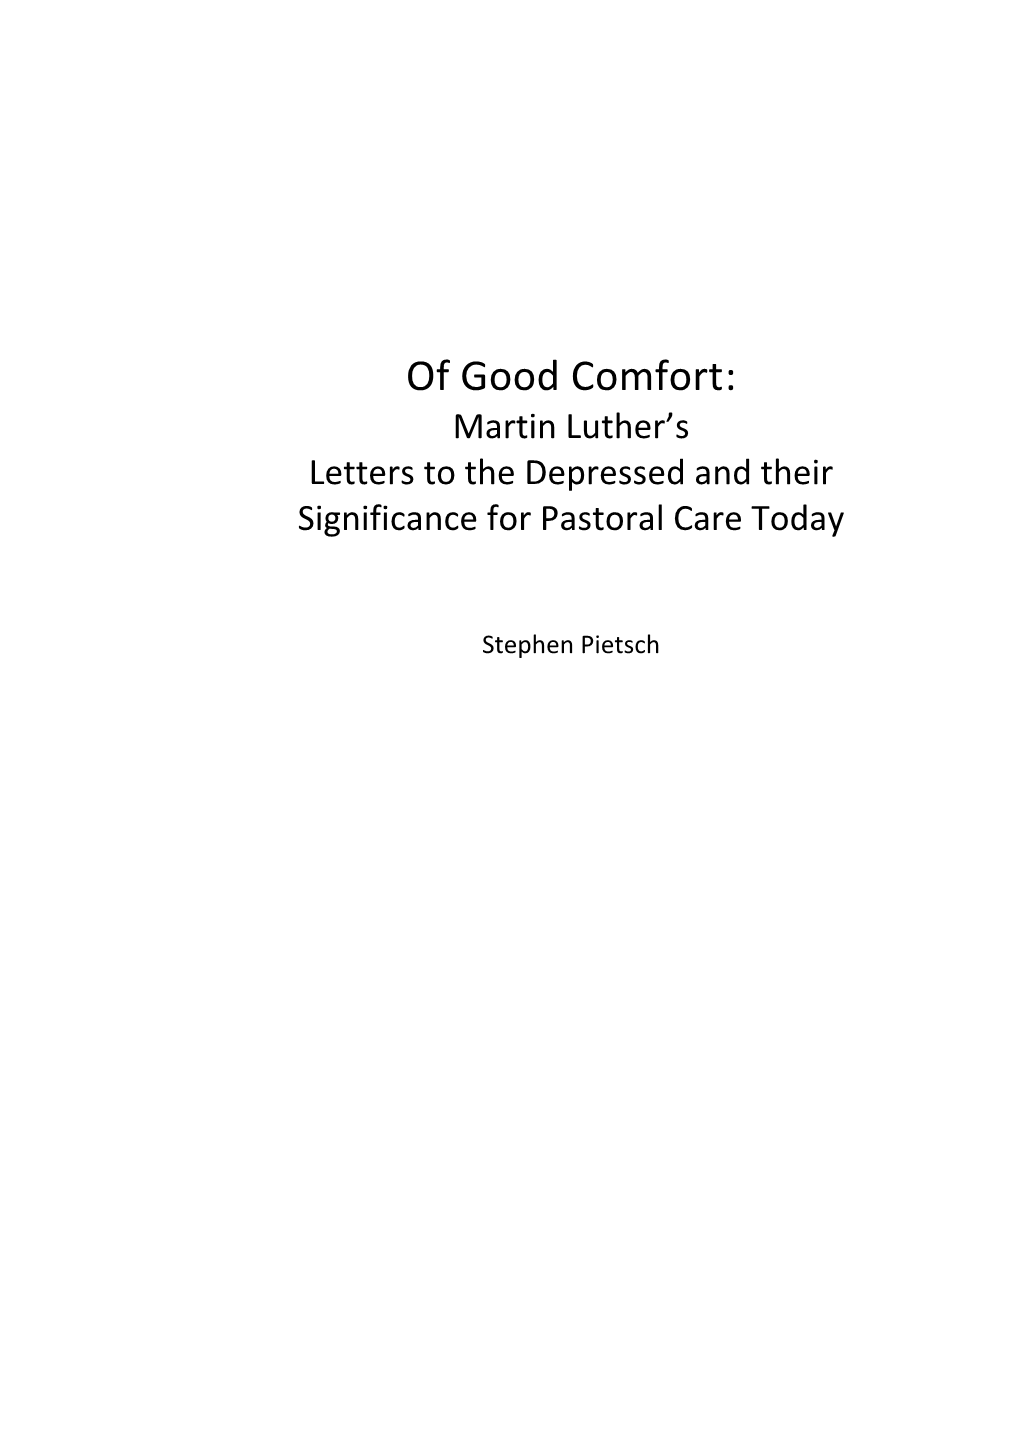 Of Good Comfort: Martin Luther’S Letters to the Depressed and Their Significance for Pastoral Care Today